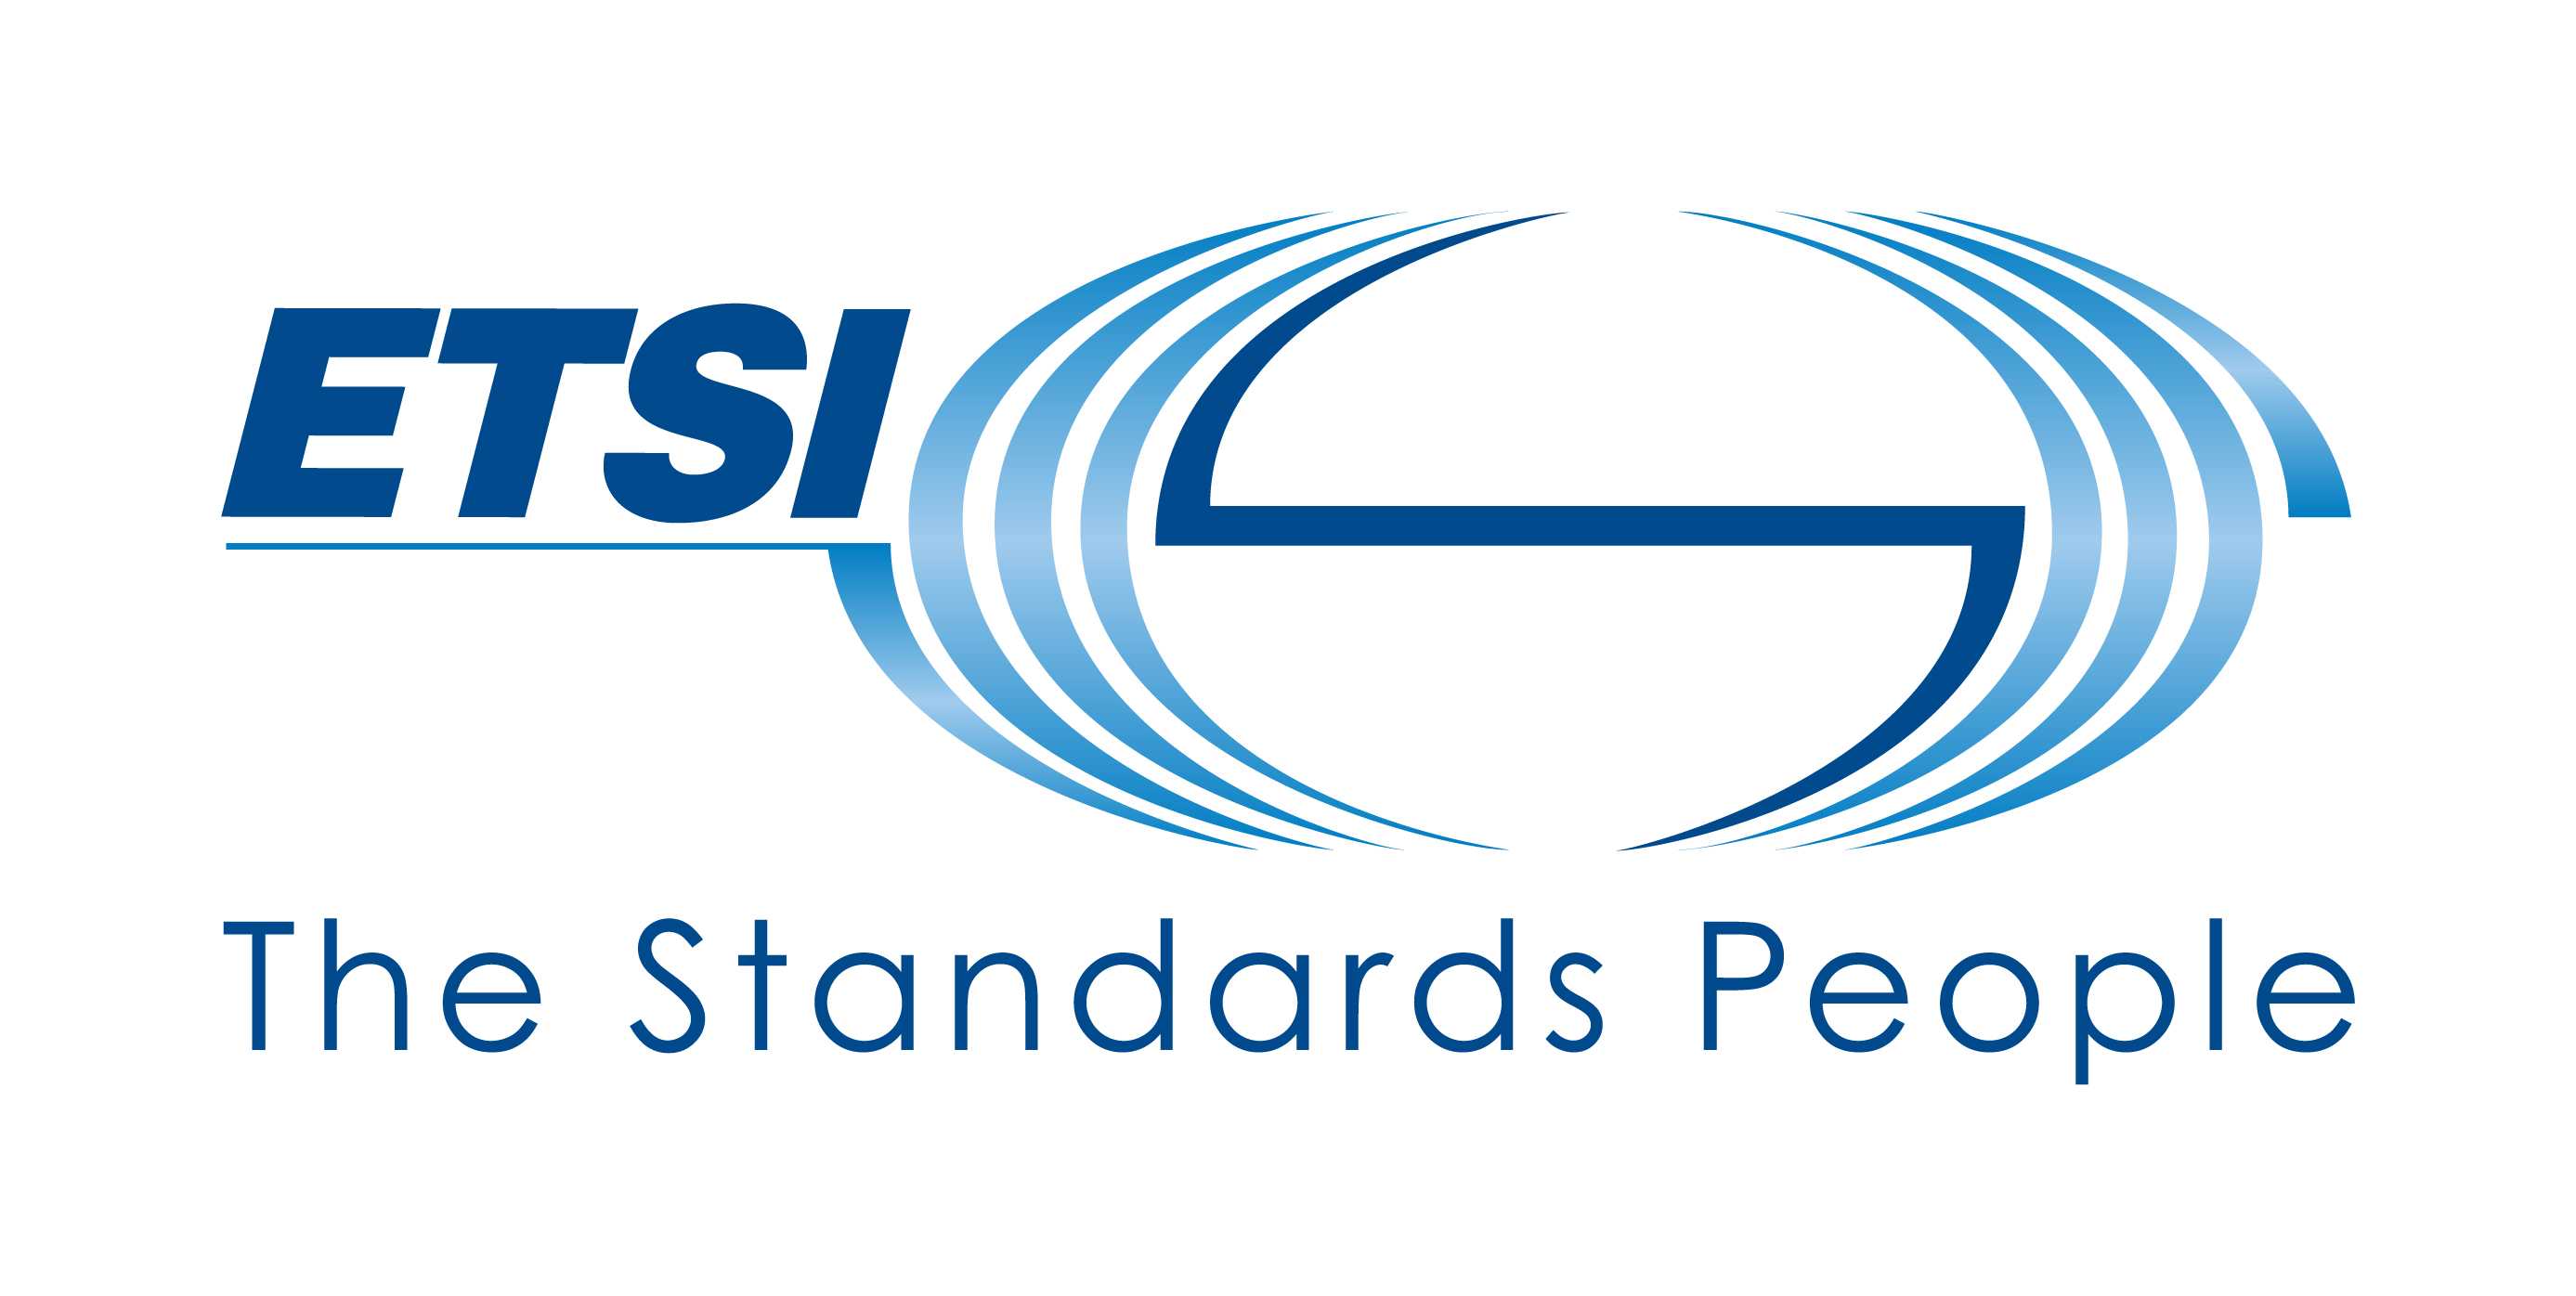 The image shows the logo of ETSI